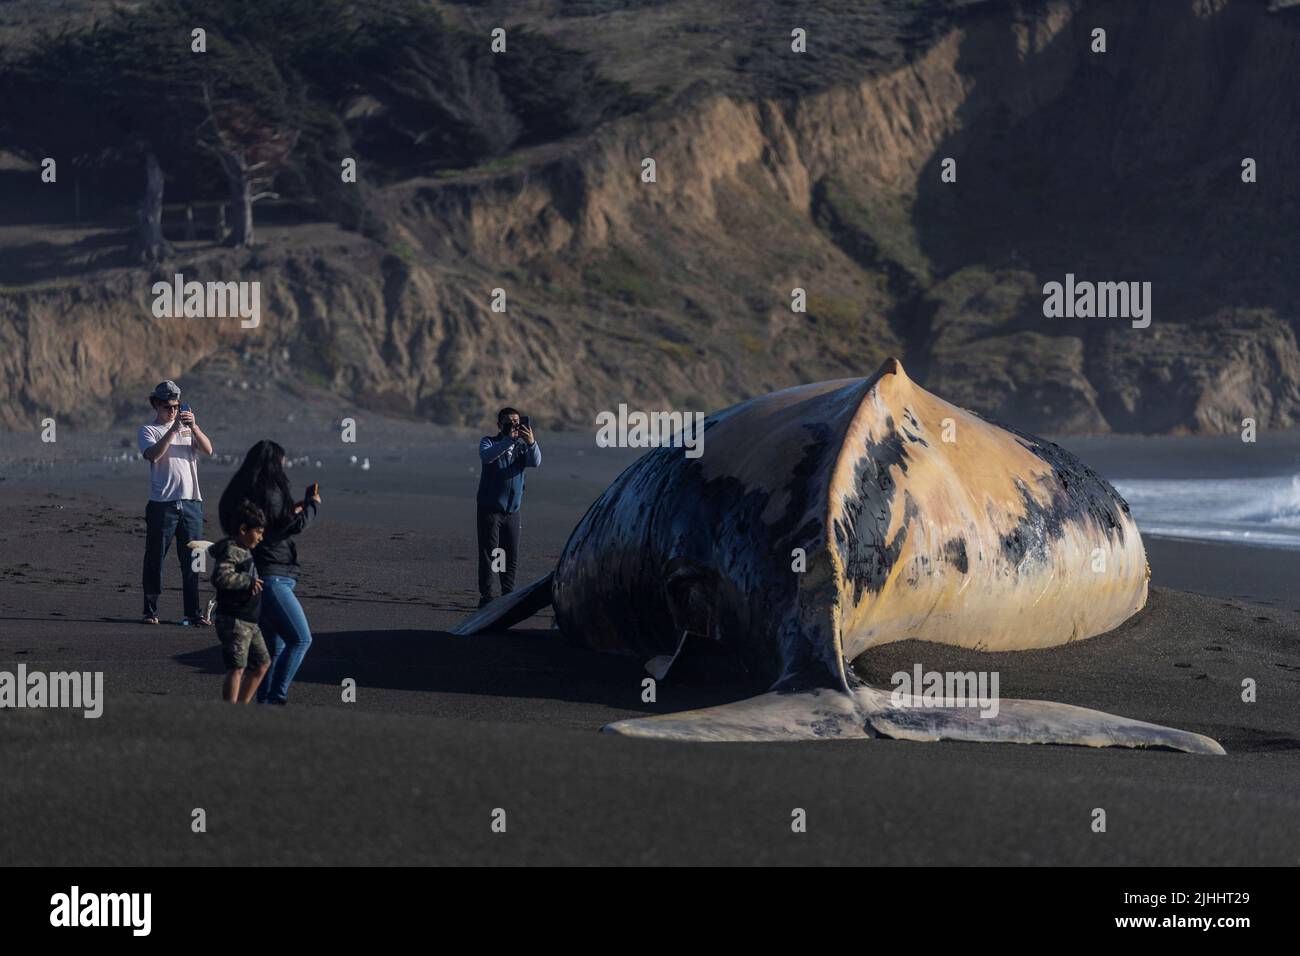 A dead humpback whale, whose cause of death is still unknown according to local media, is washed up on Sharp Park Beach in Pacifica, California, July 18, 2022. REUTERS/Carlos Barria Stock Photo